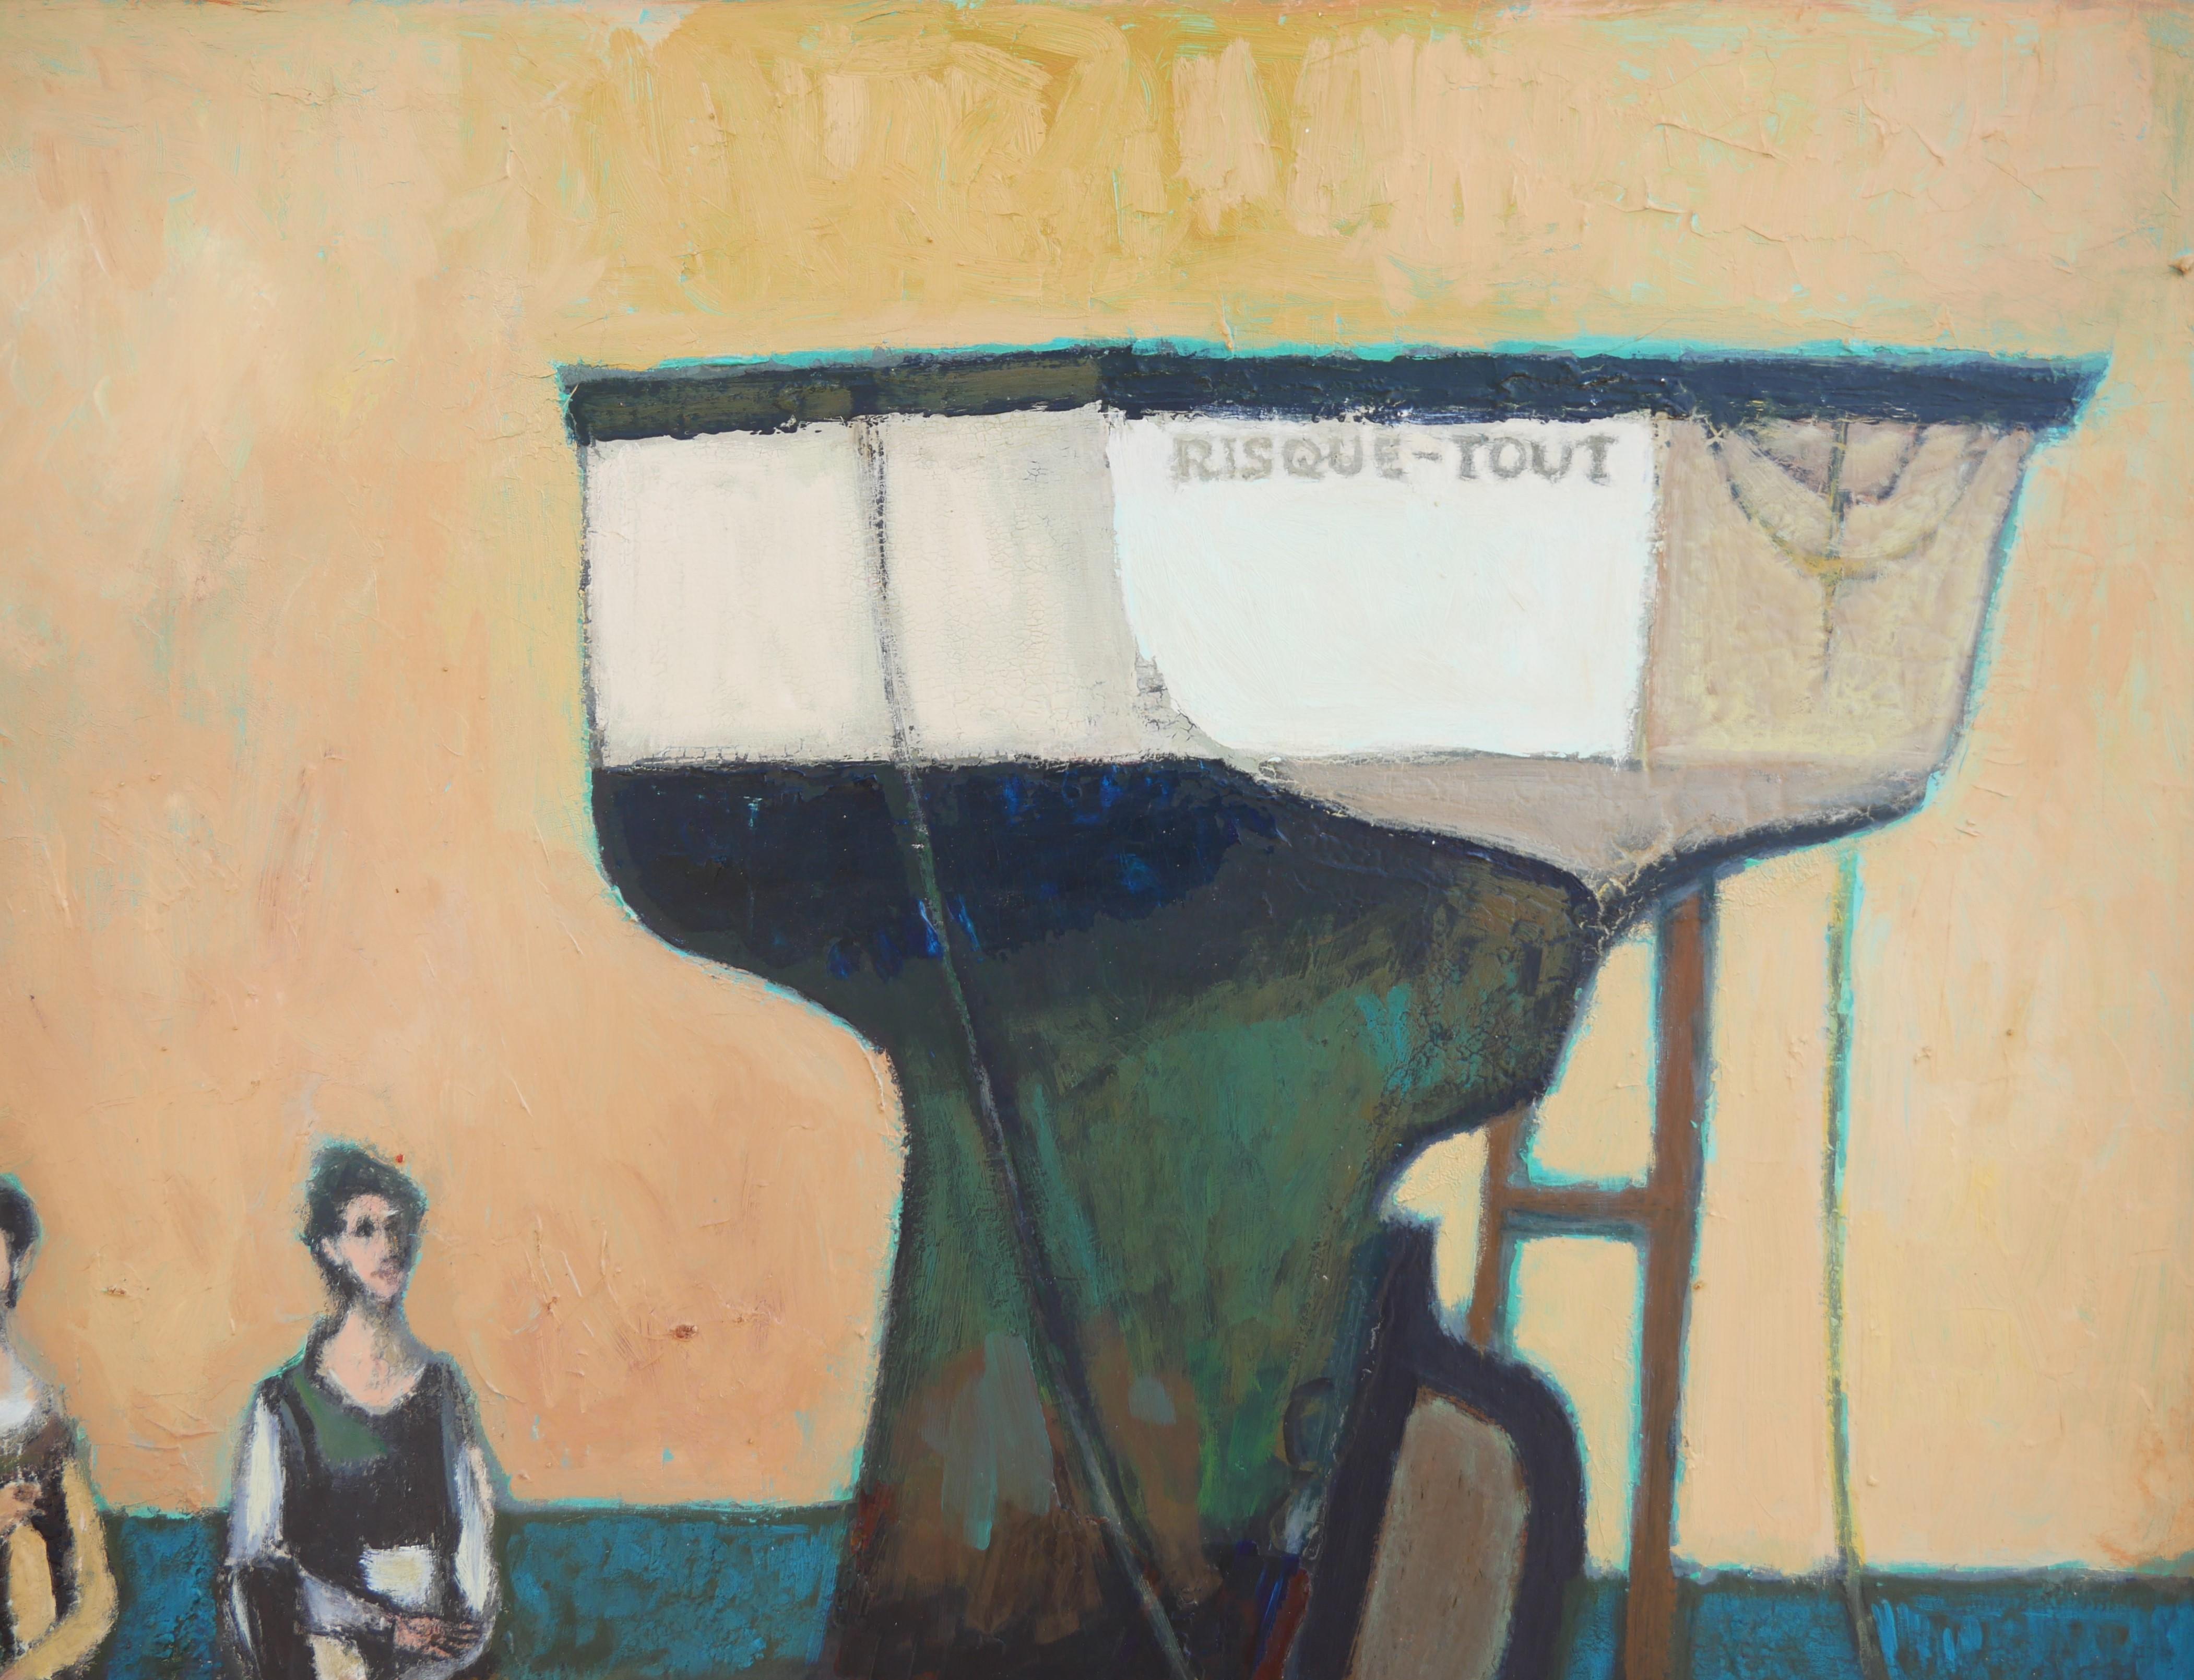 Modern abstract figurative nautical landscape painting by Houston, TX artist David Adickes. The work features a grouping of three elongated figures gathered next to a boat labeled 